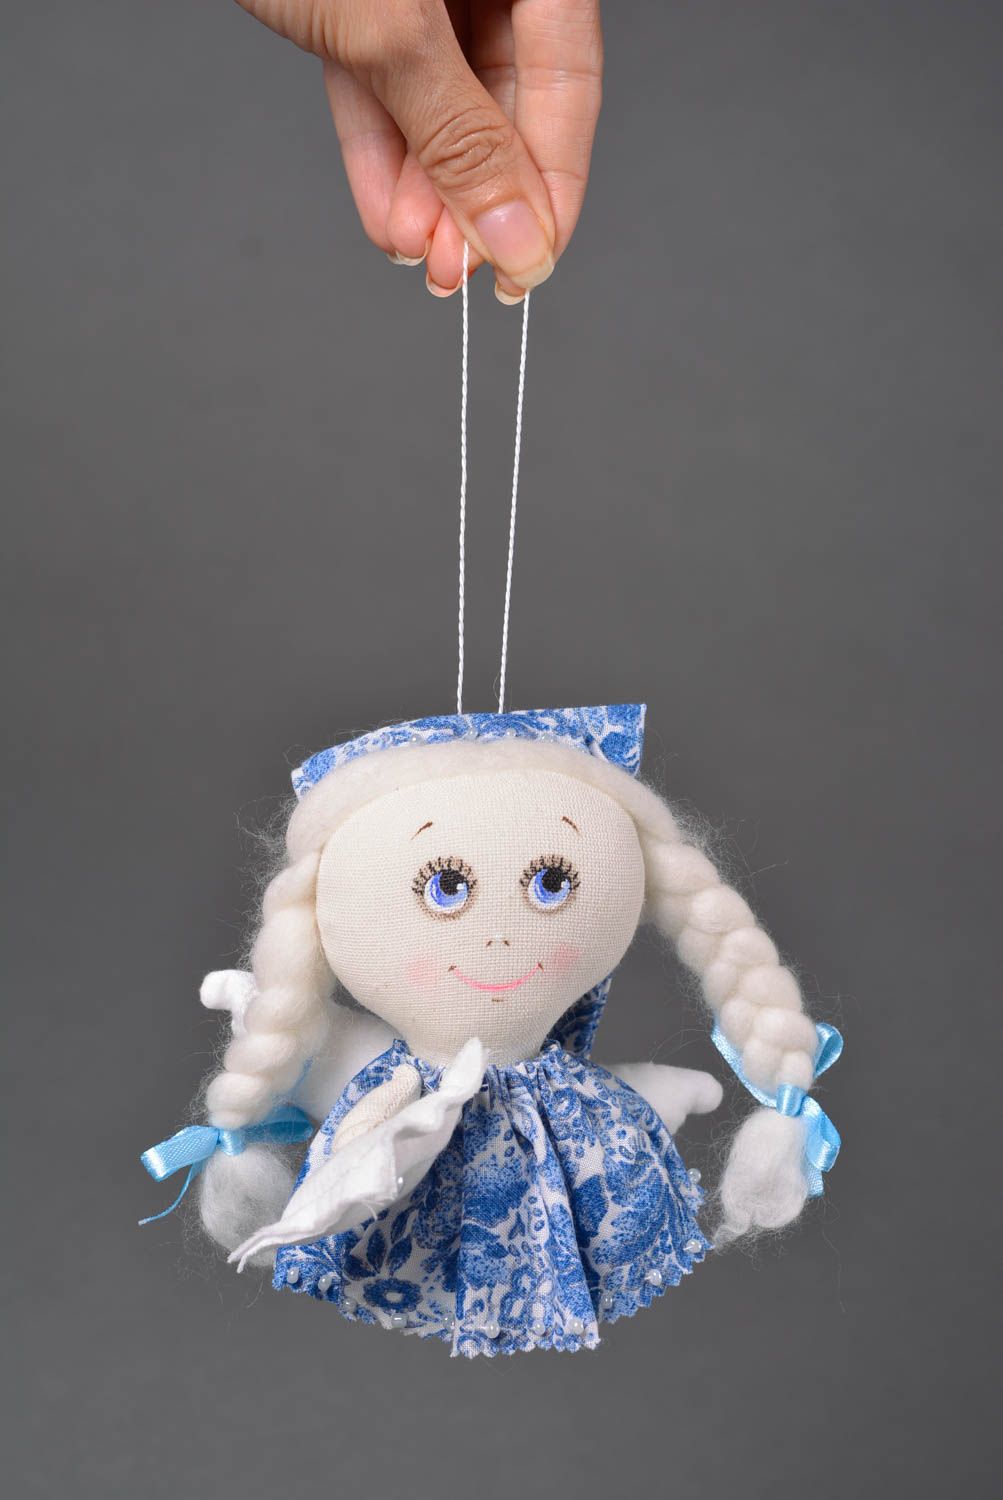 Handmade doll designer doll for kids unusual toy interior toy gift ideas photo 4